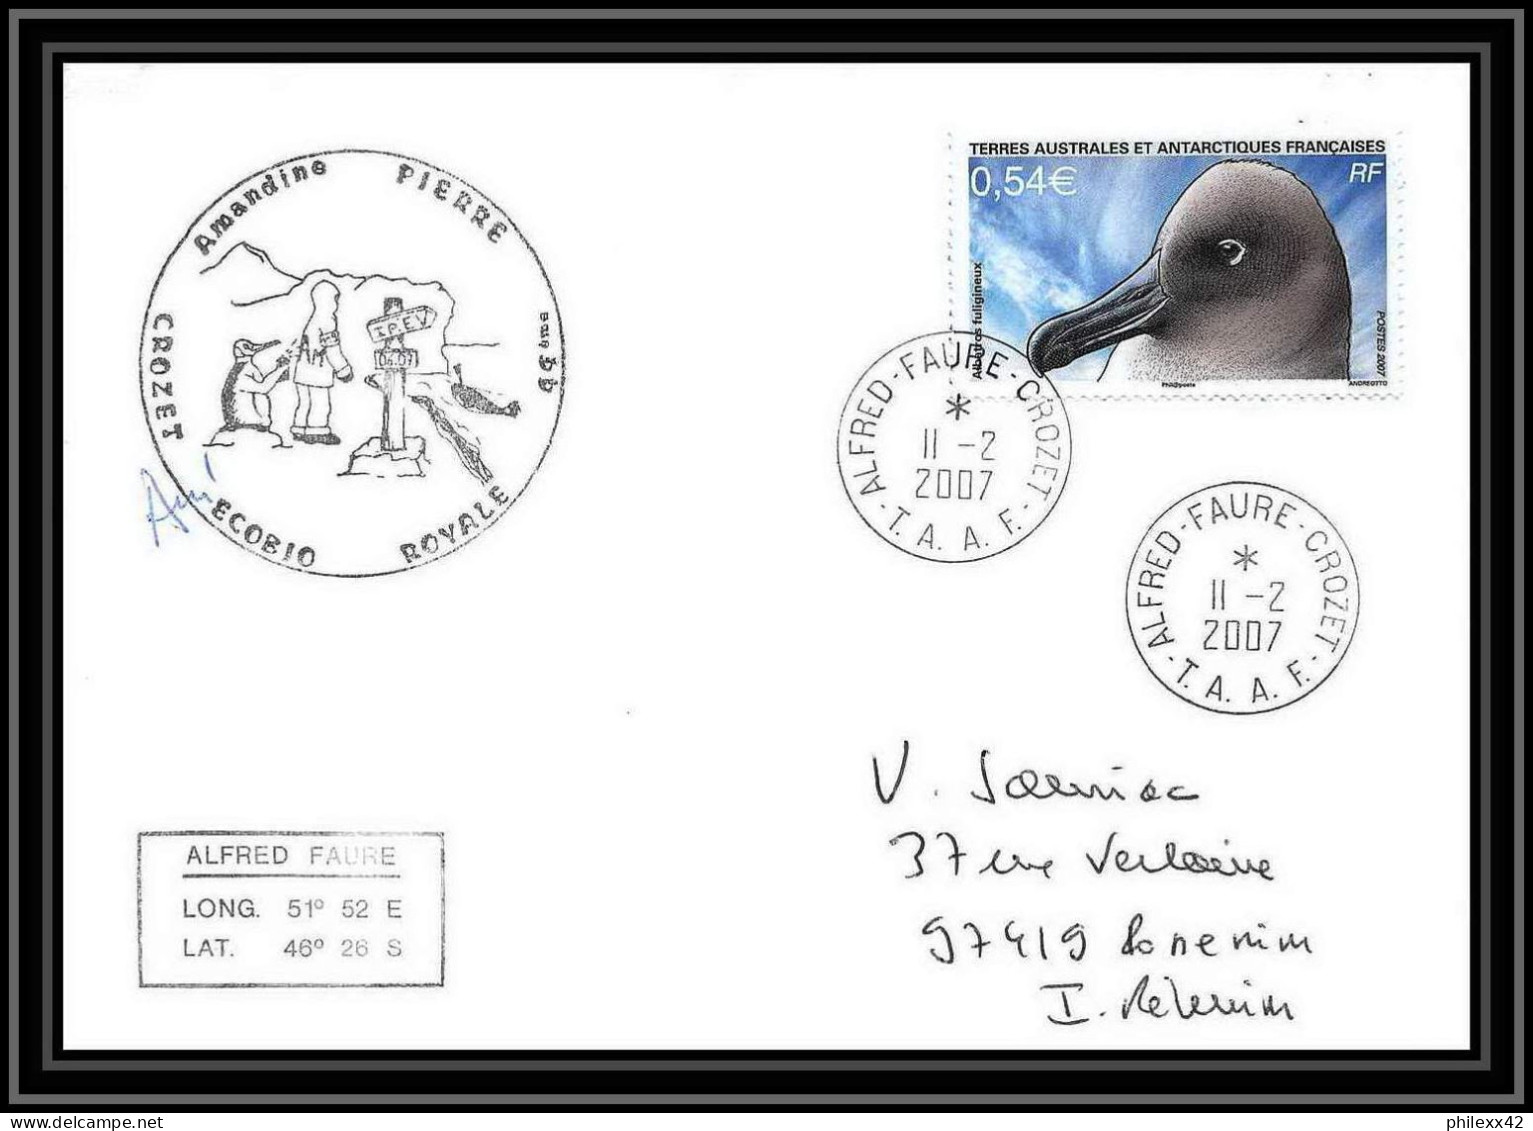 2660 ANTARCTIC TAAF Lettre Cover Dufresne 2 Signé Signed N°468 Crozet Ecobuo Royale 2007 Reunion Oiseaux (birds) - Antarctic Expeditions